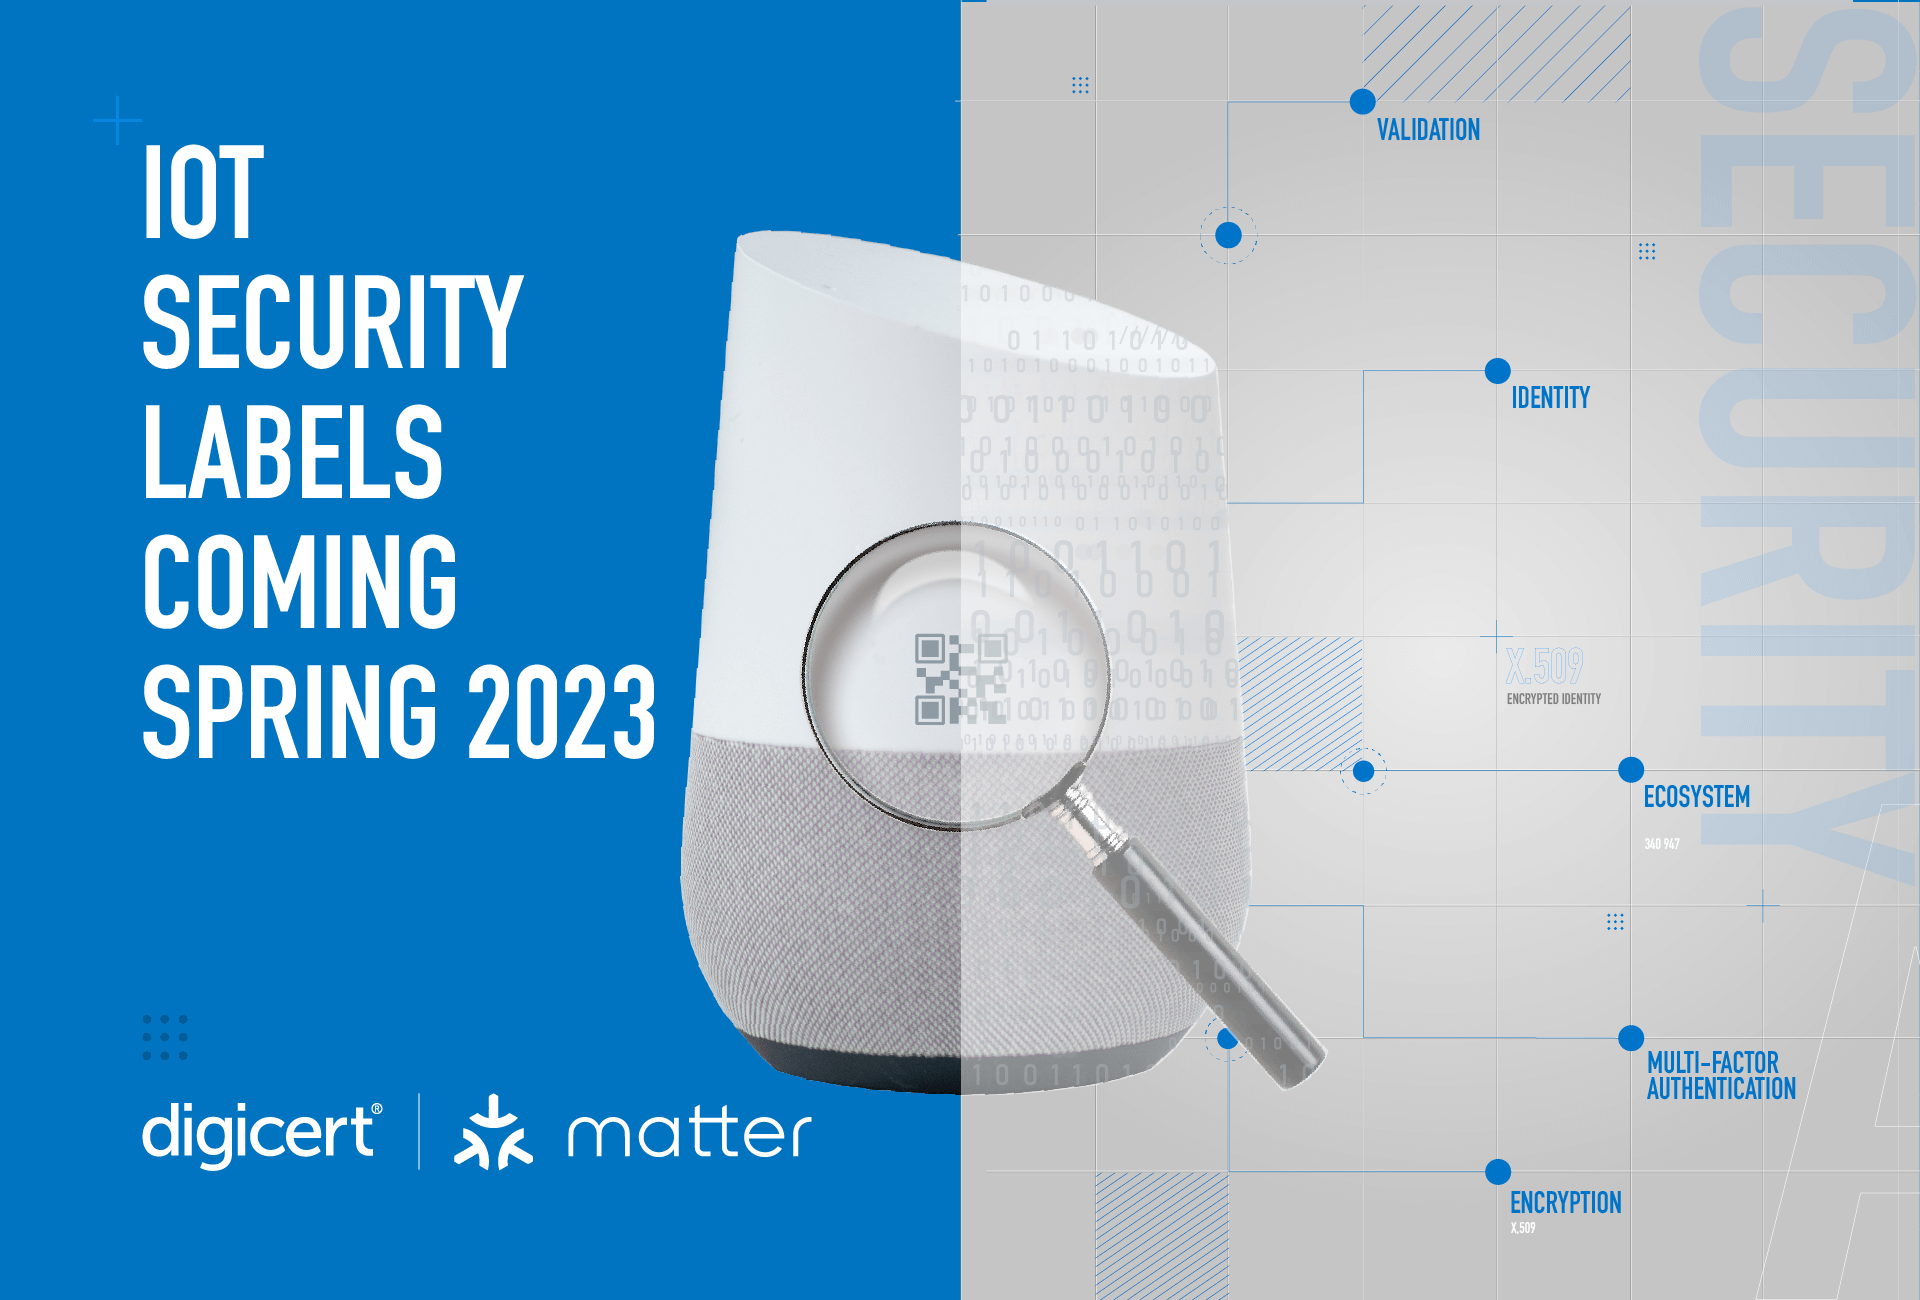 U.S. Efforts Underway for IoT Security Labels by Spring 2023